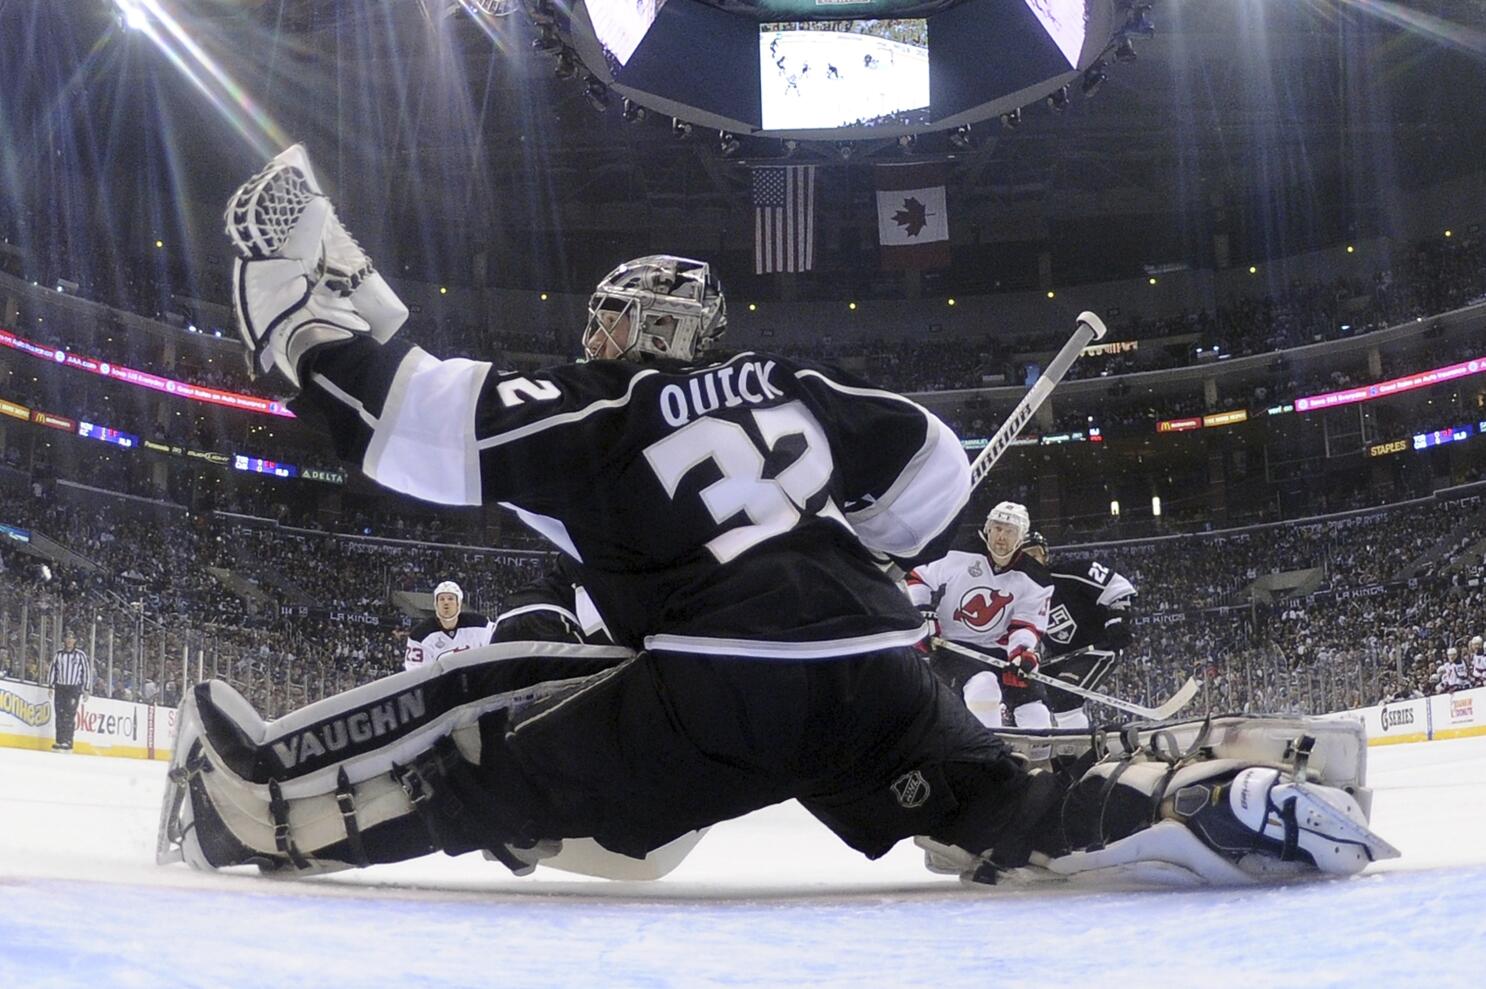 Kings trade Jonathan Quick, who led team to two Stanley Cup titles